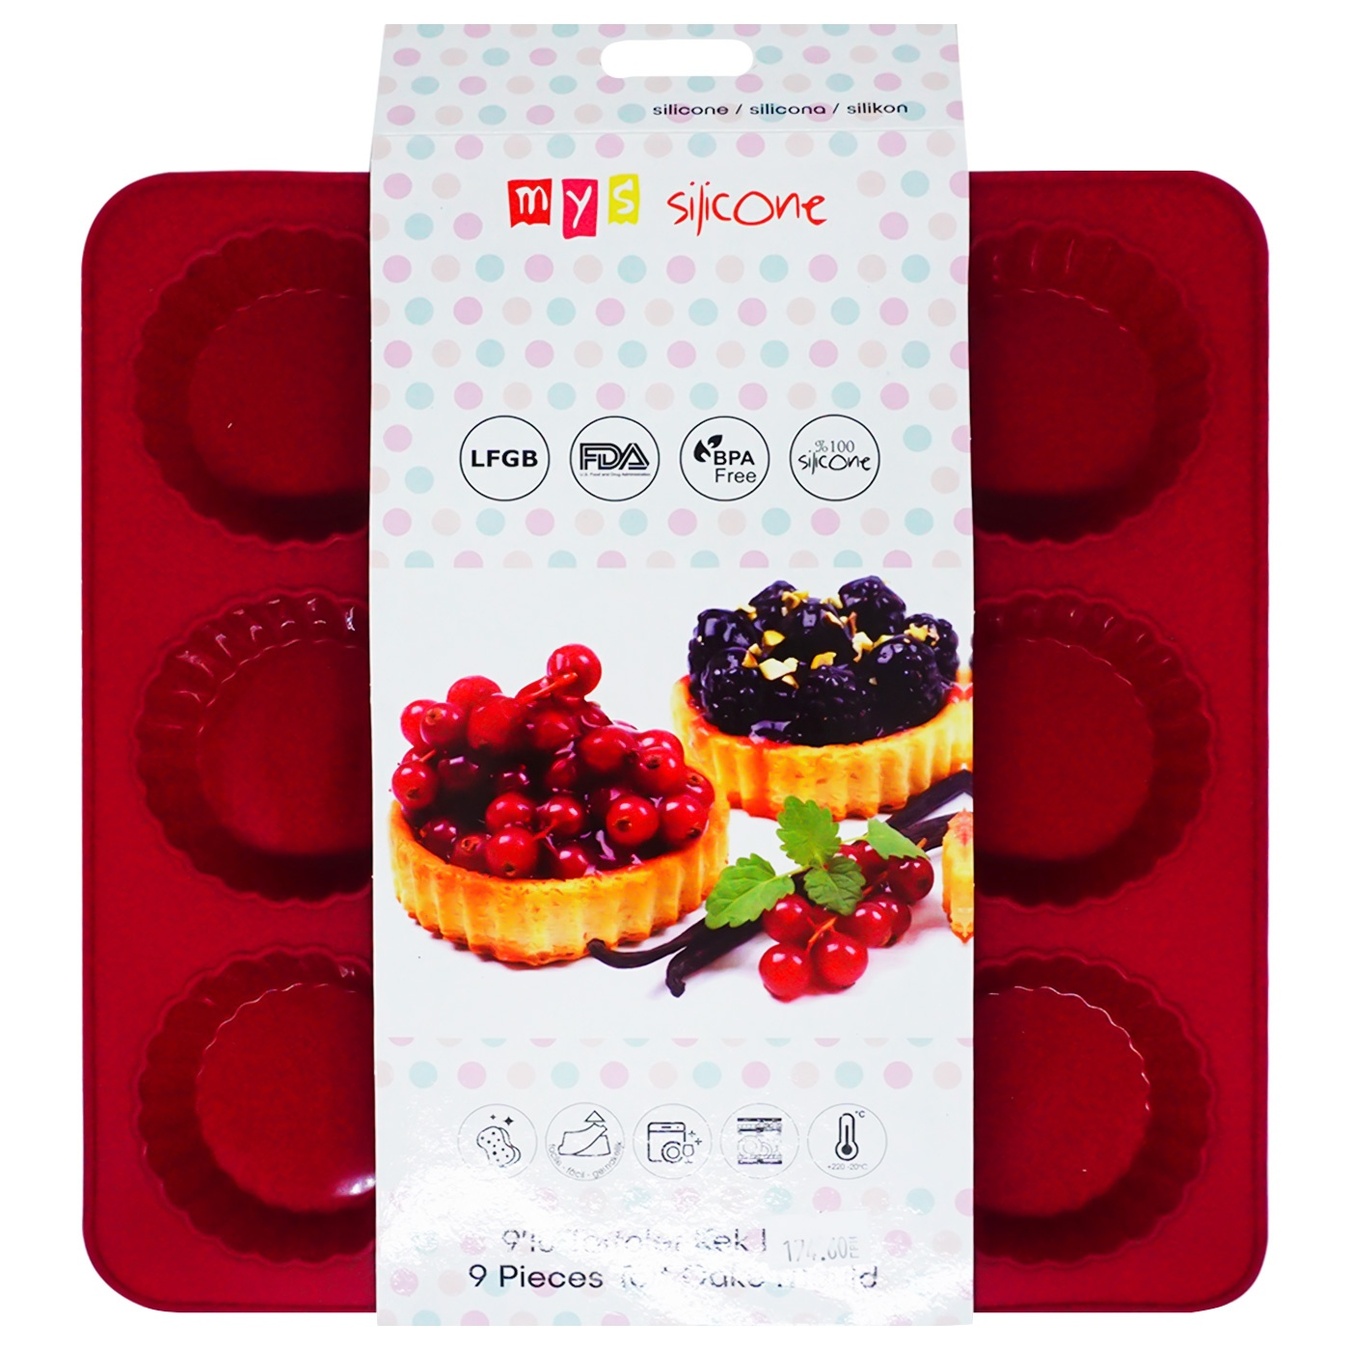 MYS silicone form for baking tartlets 9 pcs